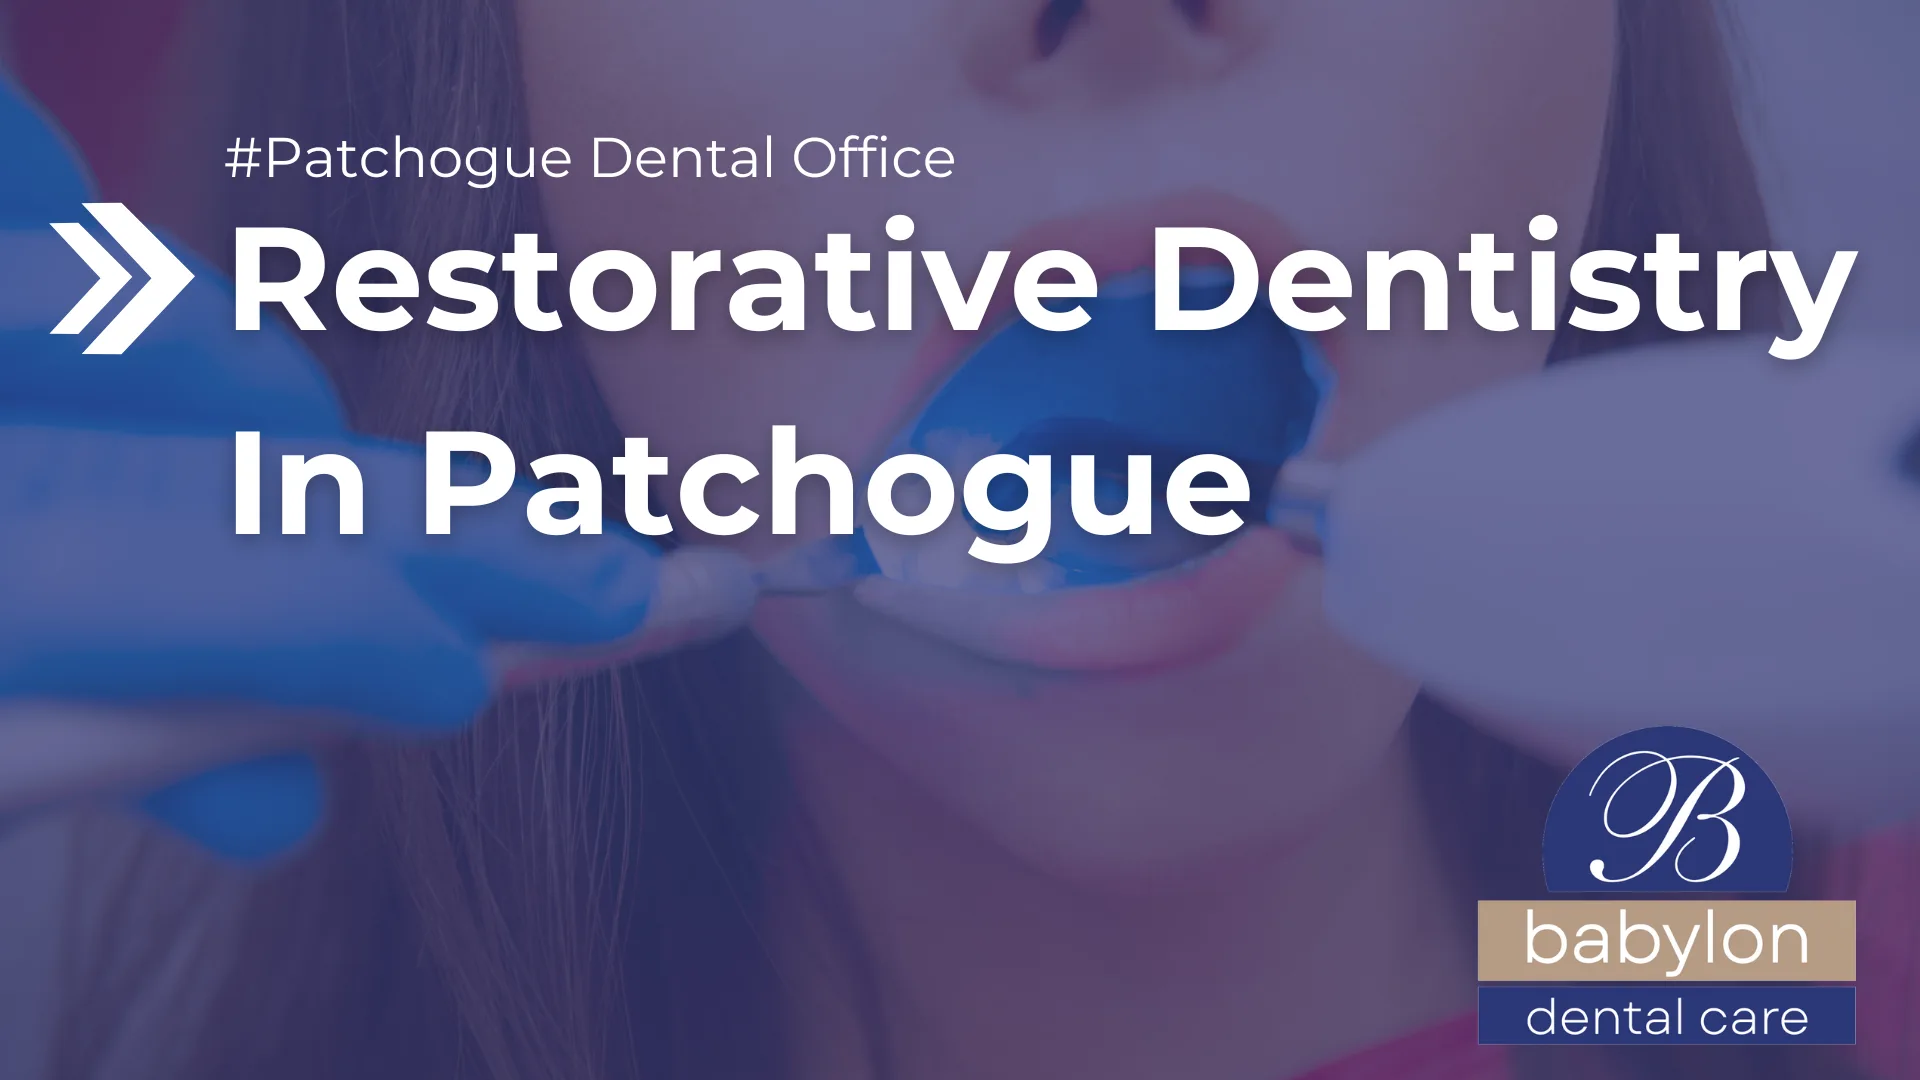 Restorative Dentistry In Patchogue Image - new logo